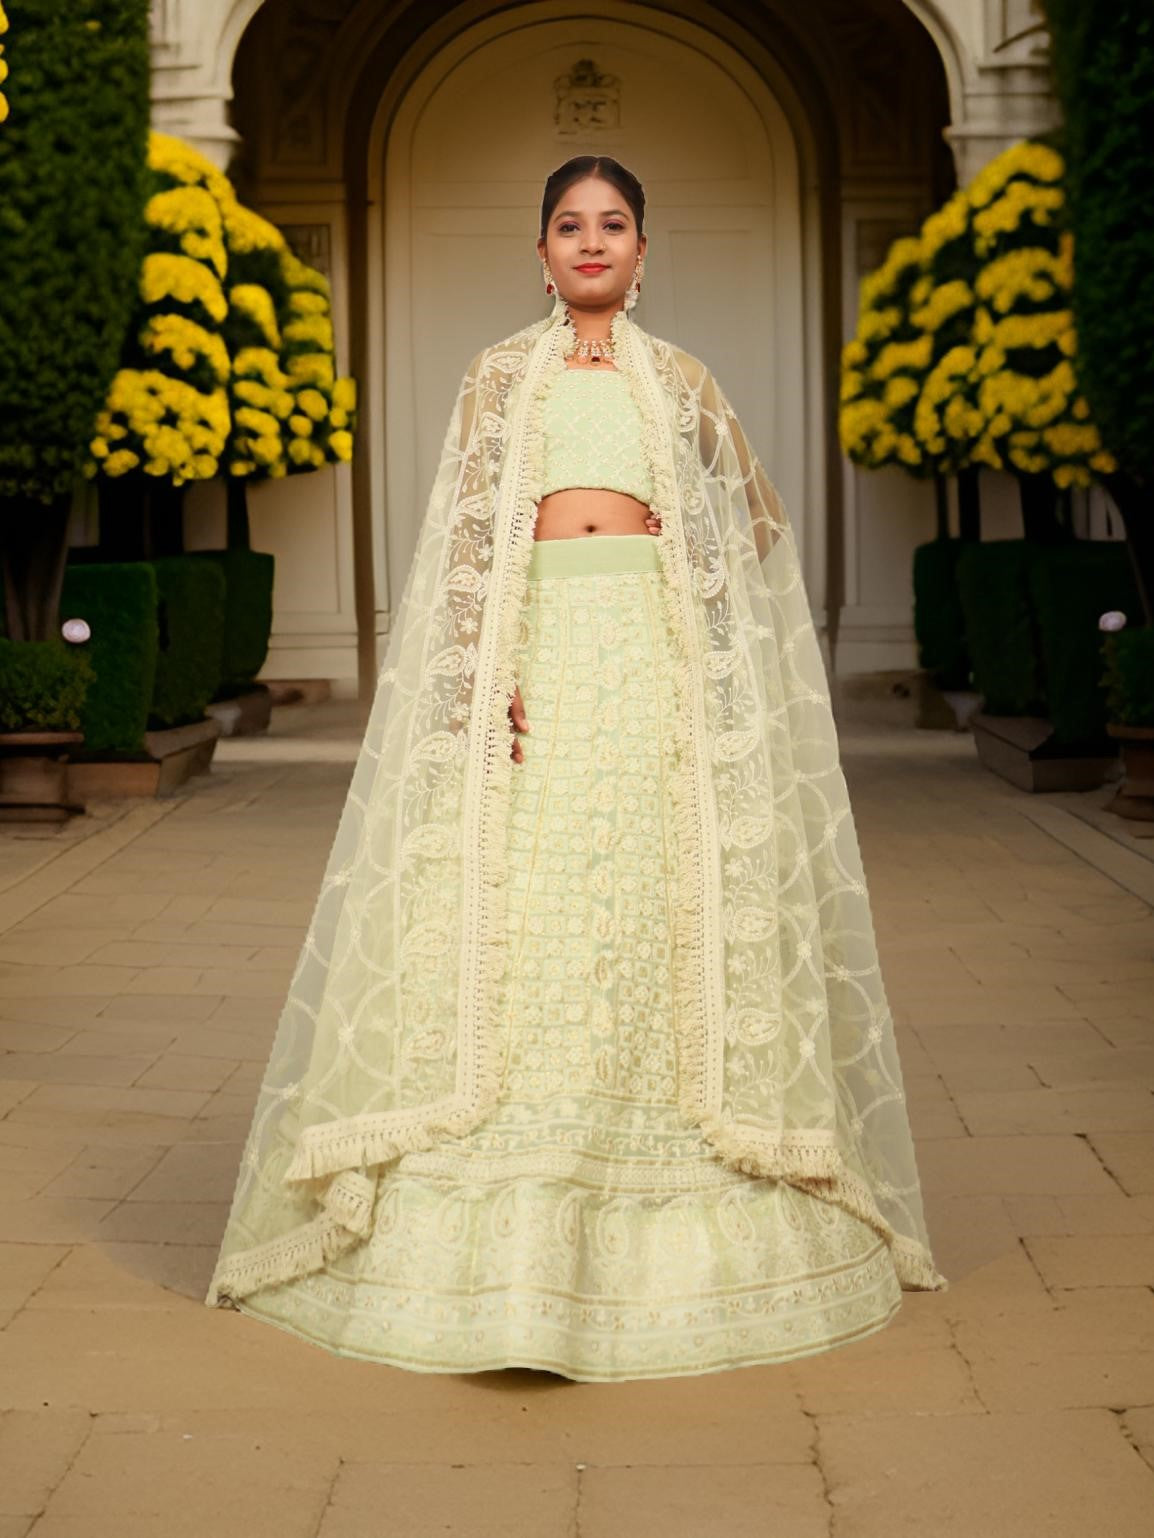 Semi-Stitched Lehenga with Embroidery &amp; Golden Sequin work by Shreekama L. Pista Green Semi-Stitched Lehenga for Party Festival Wedding Occasion in Noida